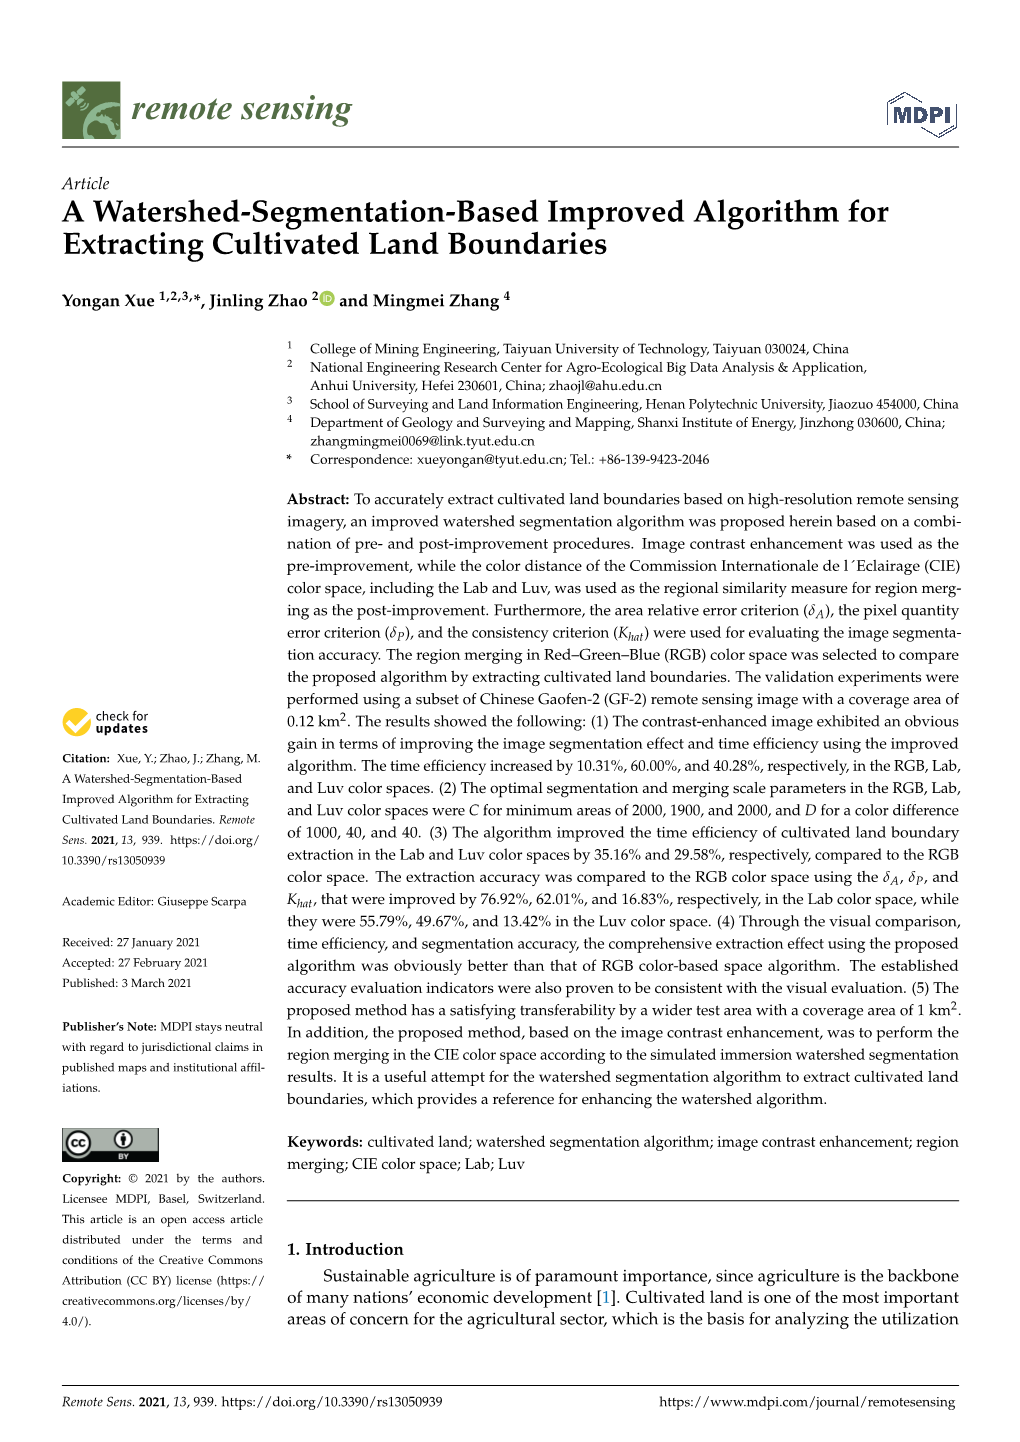 A Watershed-Segmentation-Based Improved Algorithm for Extracting Cultivated Land Boundaries